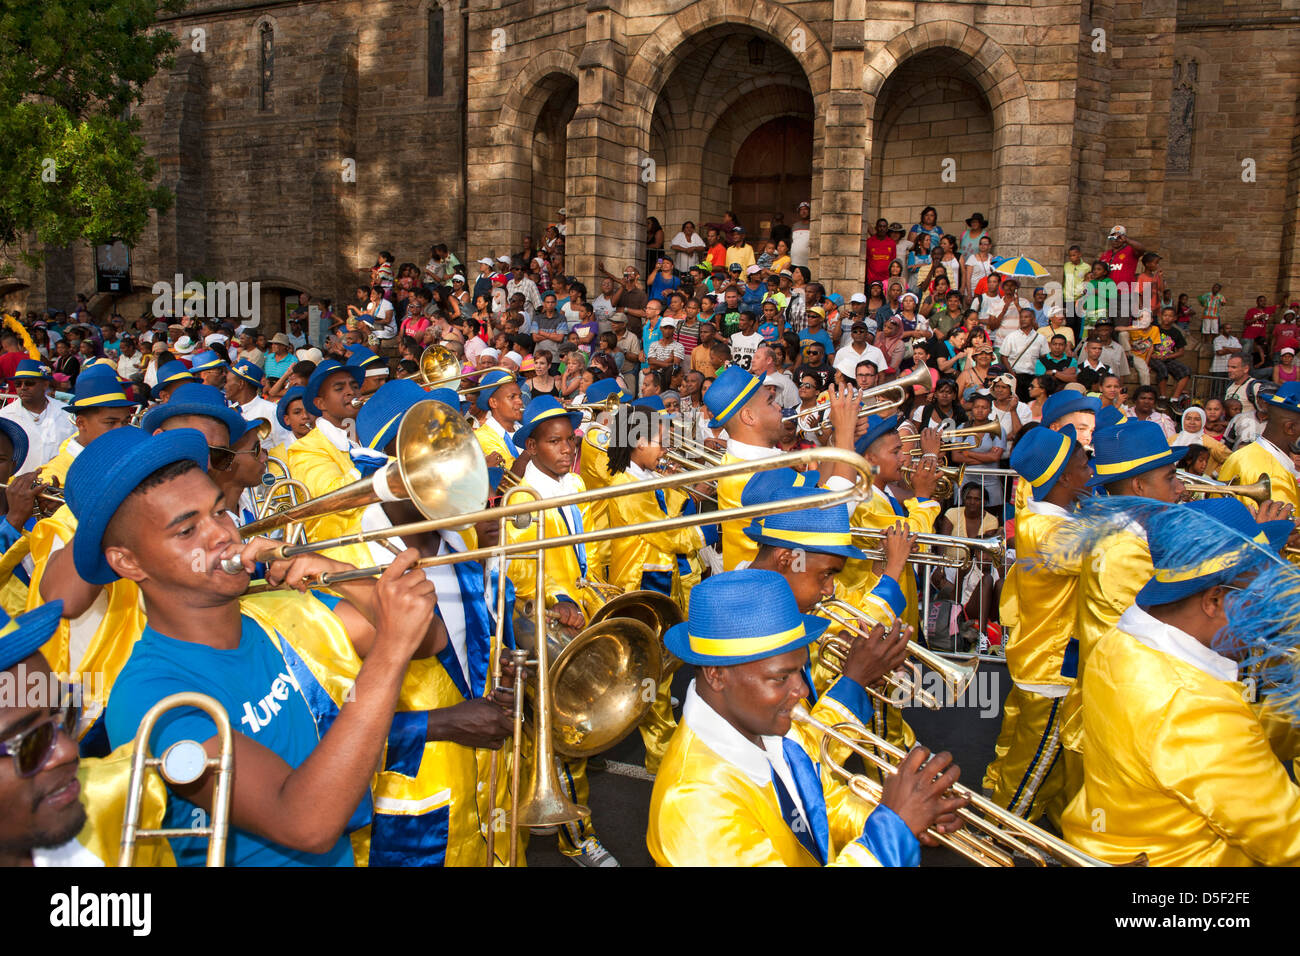 The Cape Minstrels / Kaapse Klopse parade held annually on the 2nd January in Cape Town, South Africa. Stock Photo